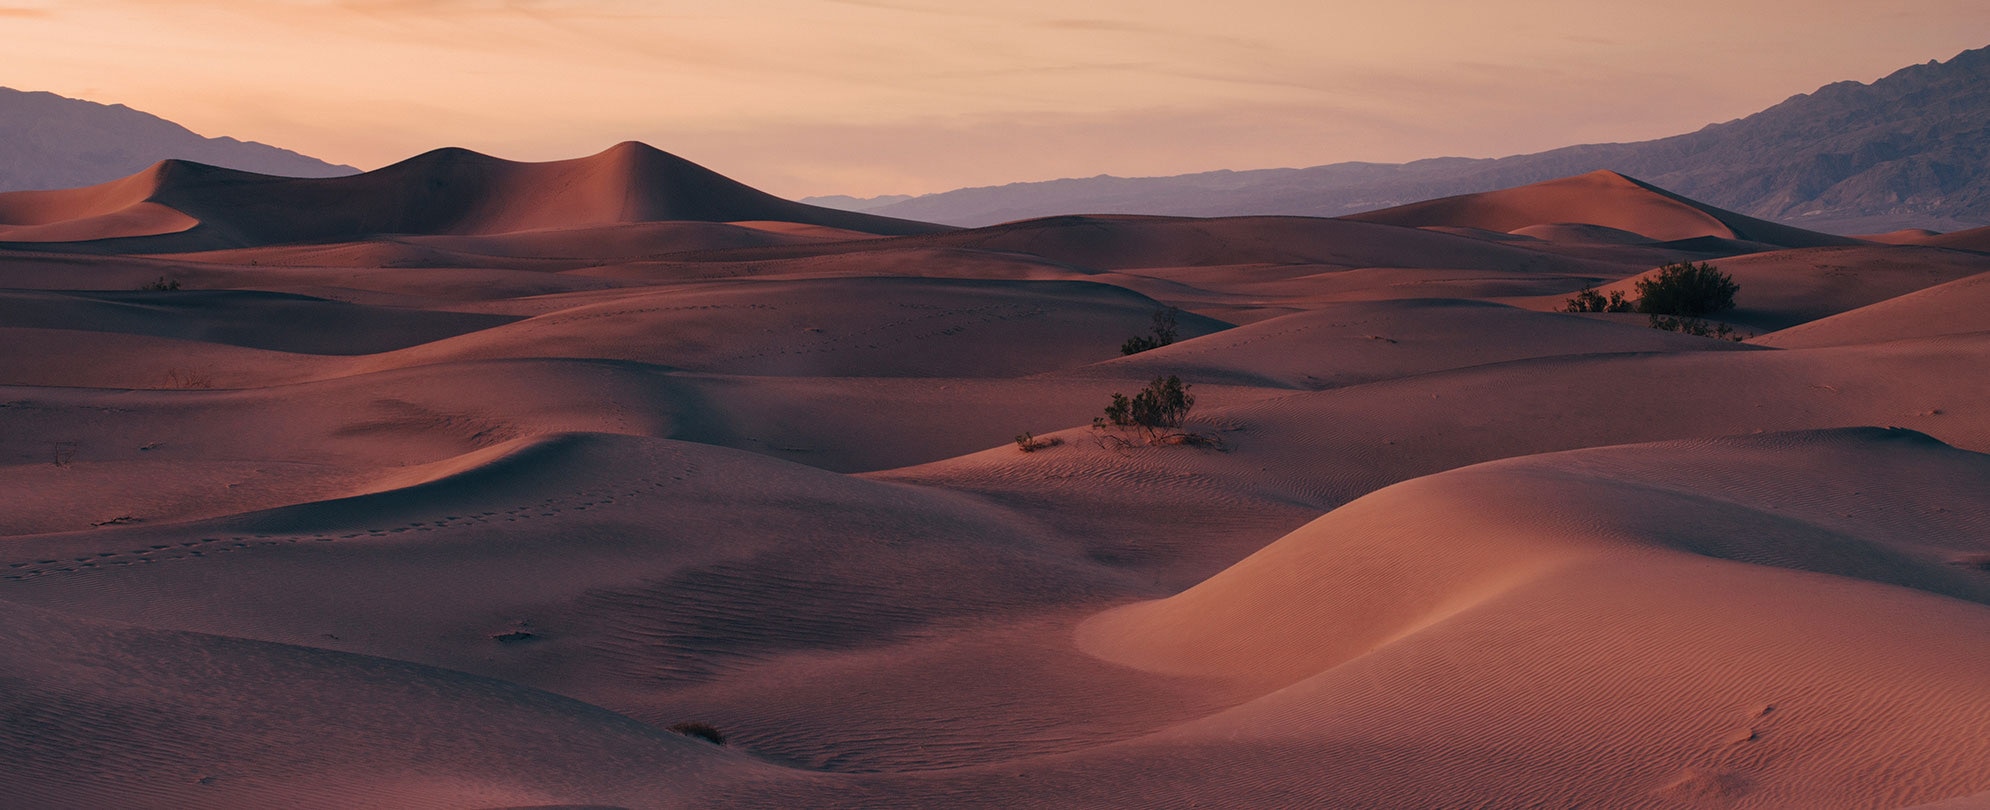 Scenic sand dunes at dusk during a vacation to Death Valley National Park in California